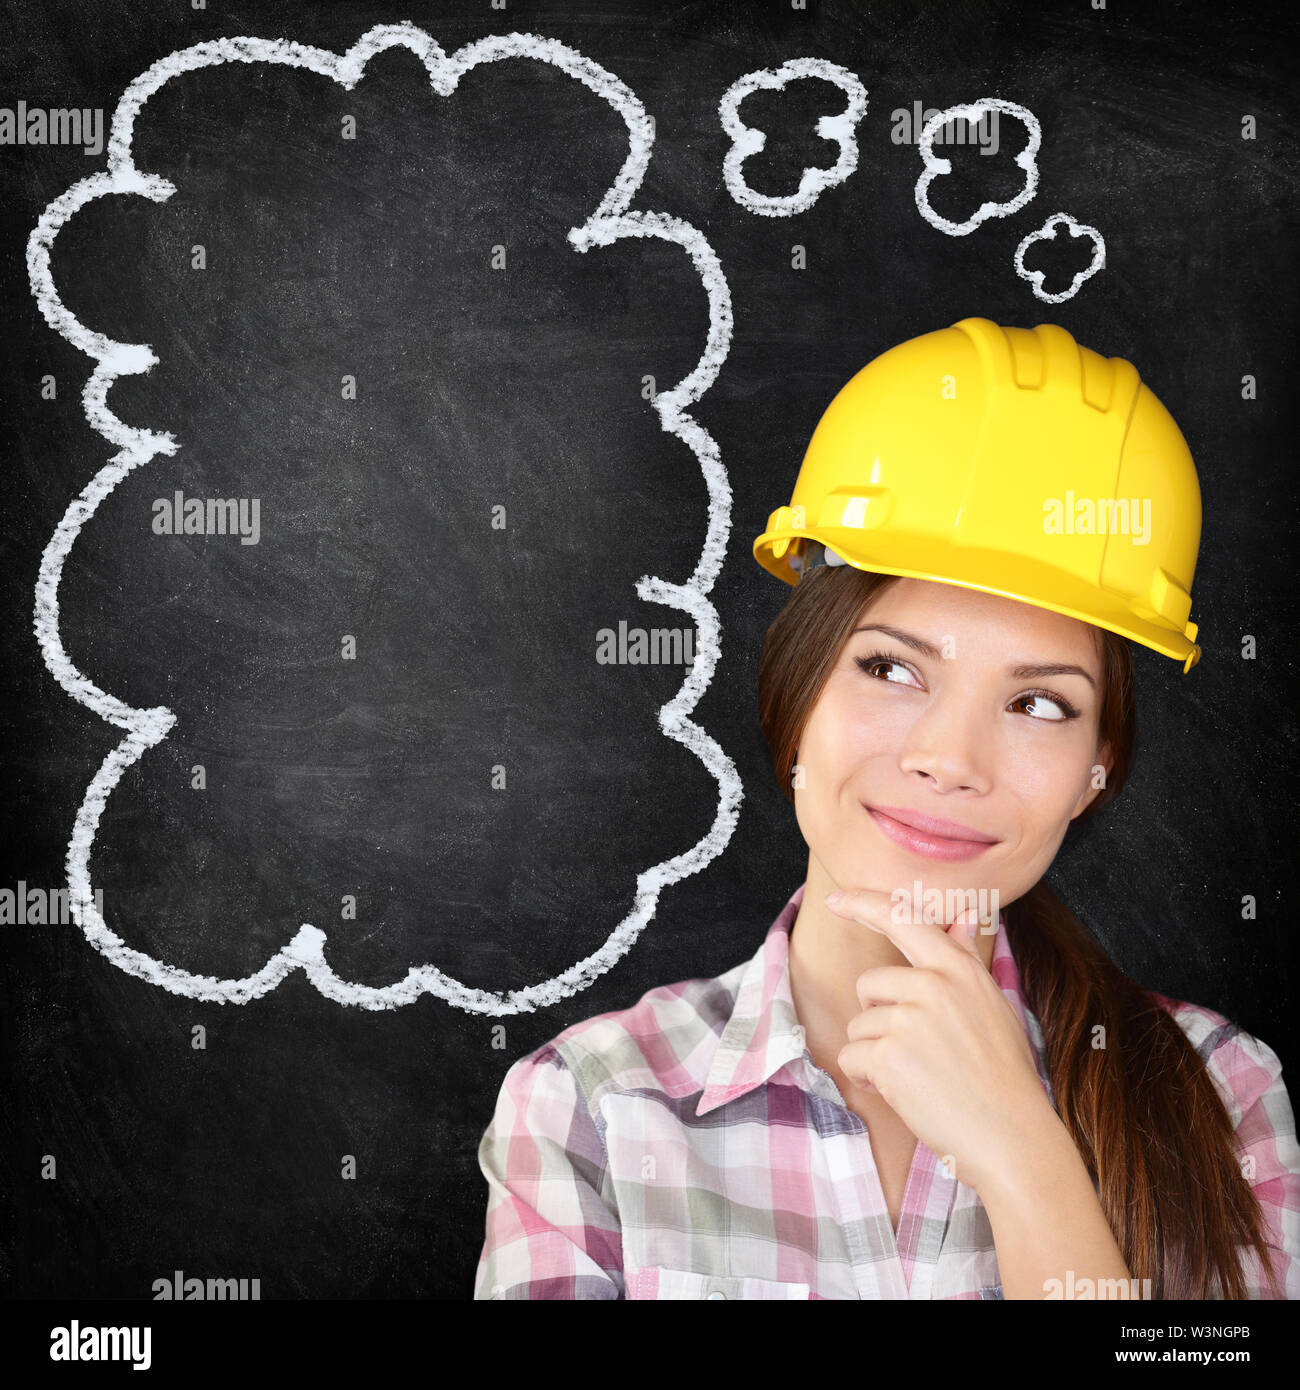 Thinking young female construction worker, architect, engineer, surveyor wearing hardhat on blackboard thinking with hand to chin looking to the thinking bubble on chalkboard texture. Stock Photo